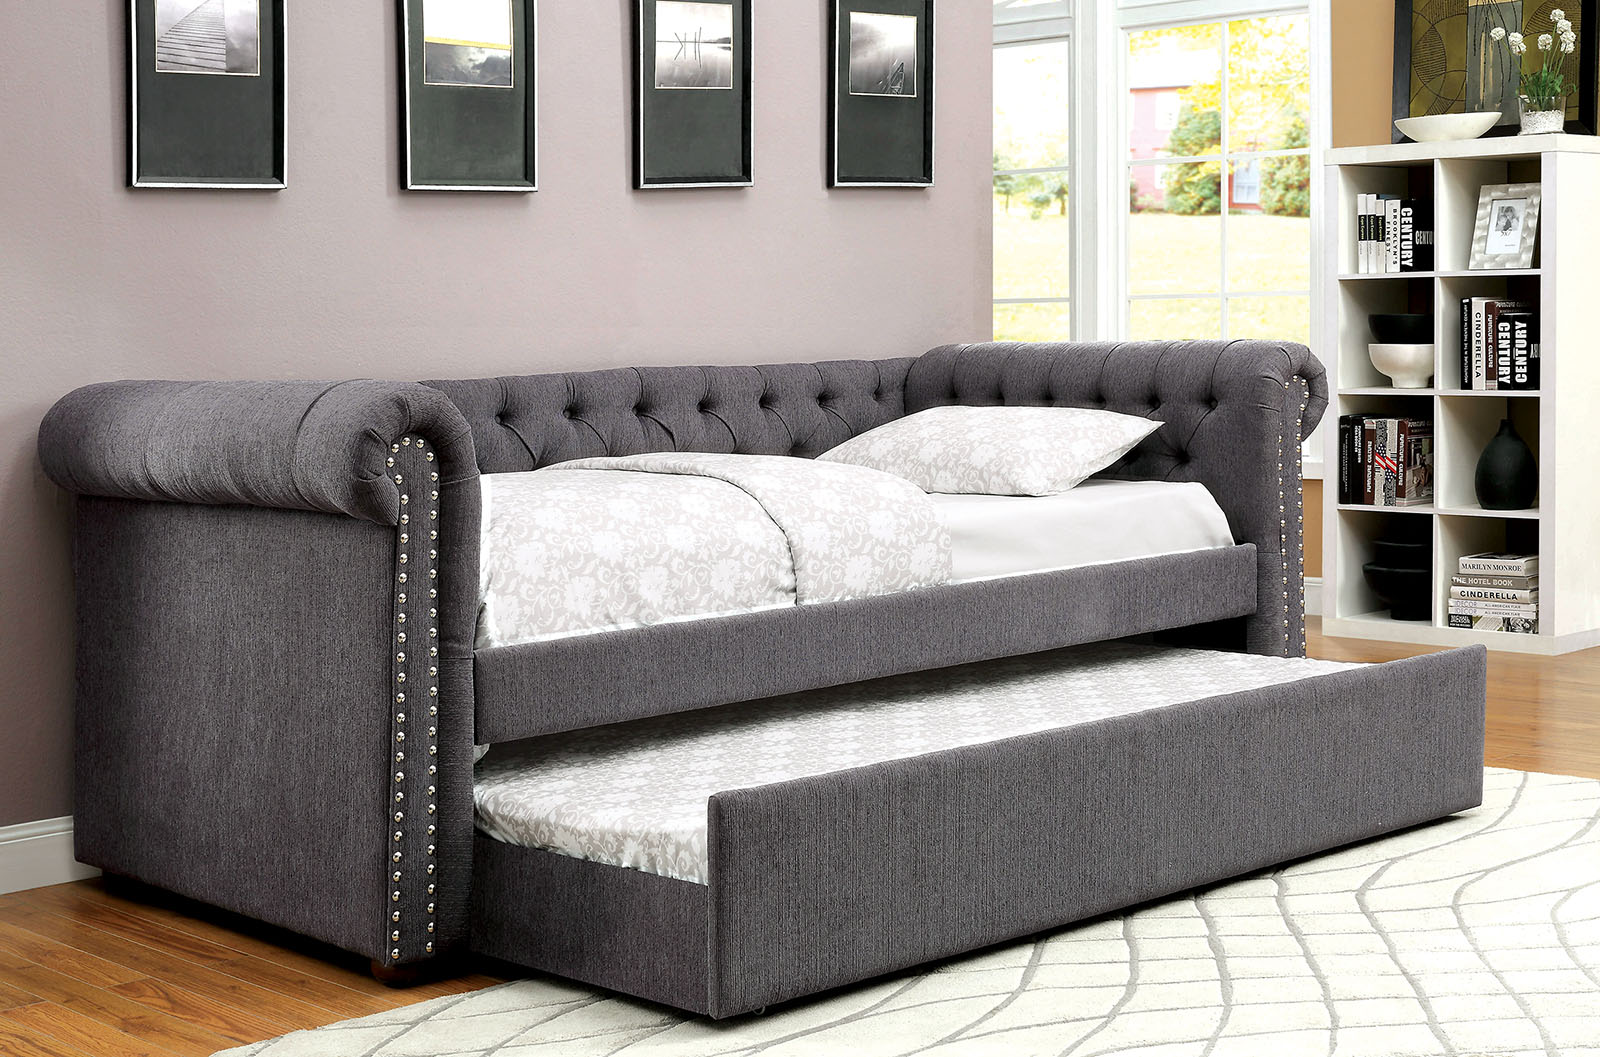 * CM1027 - Gray Daybed